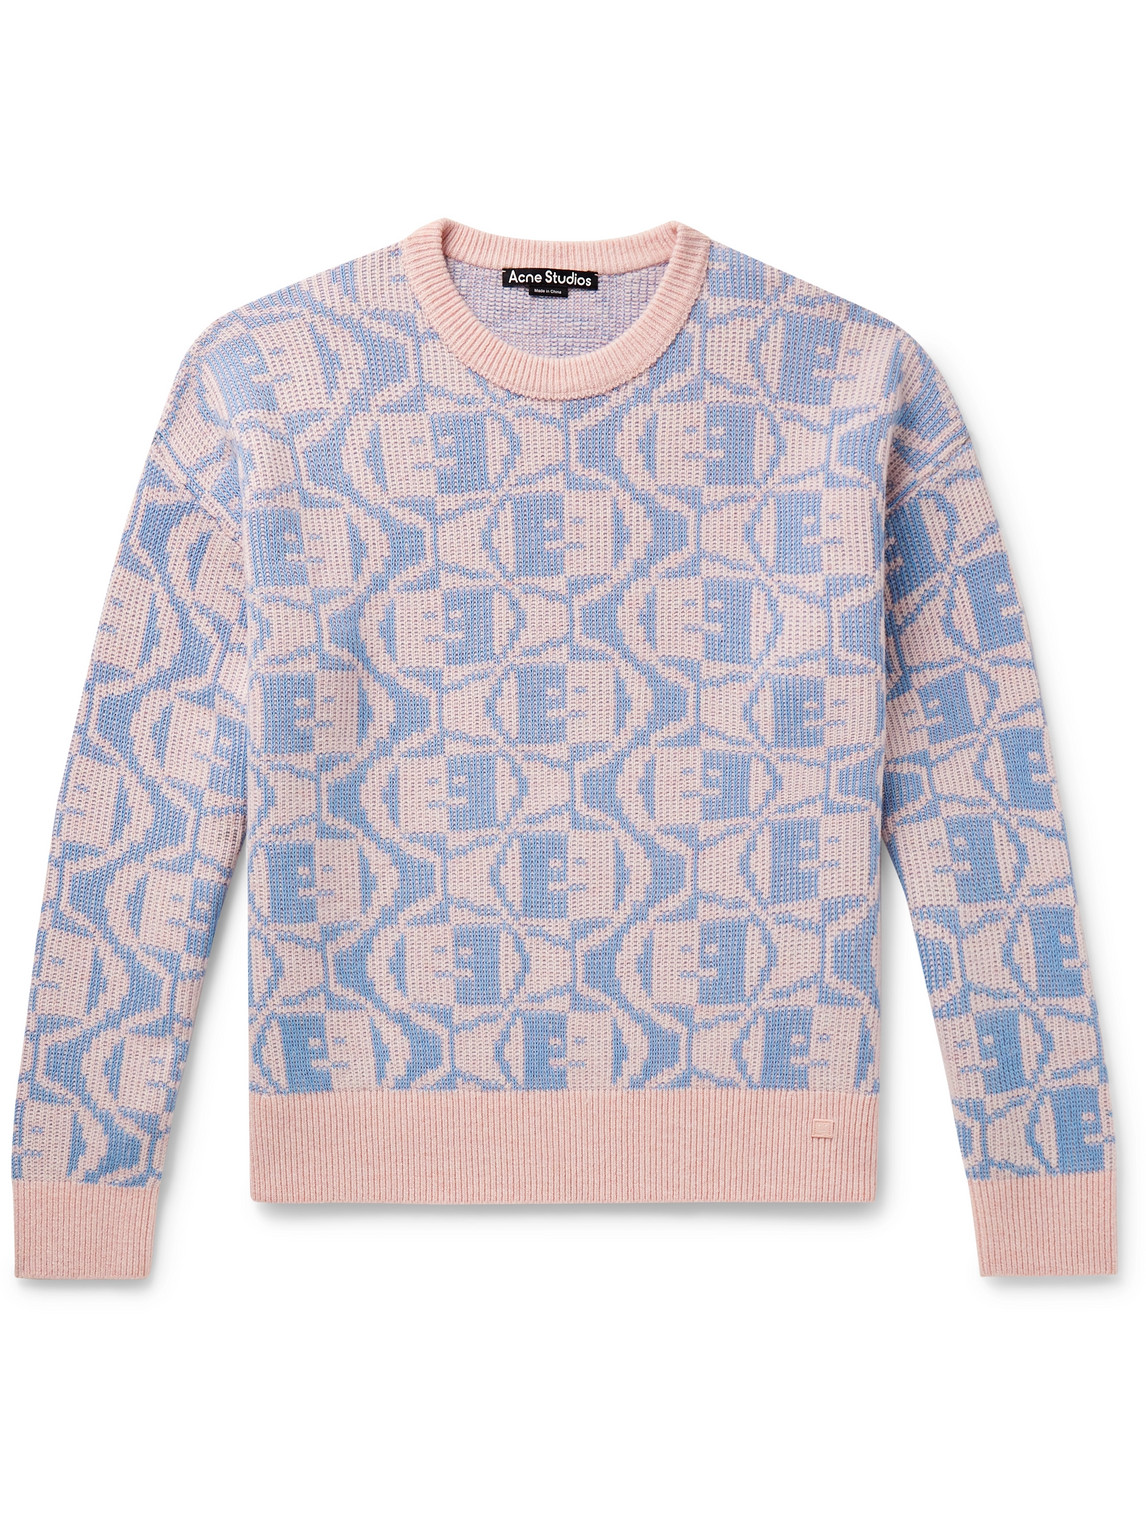 Acne Studios Katch Jacquard-knit Wool And Cotton-blend Sweater In Pink